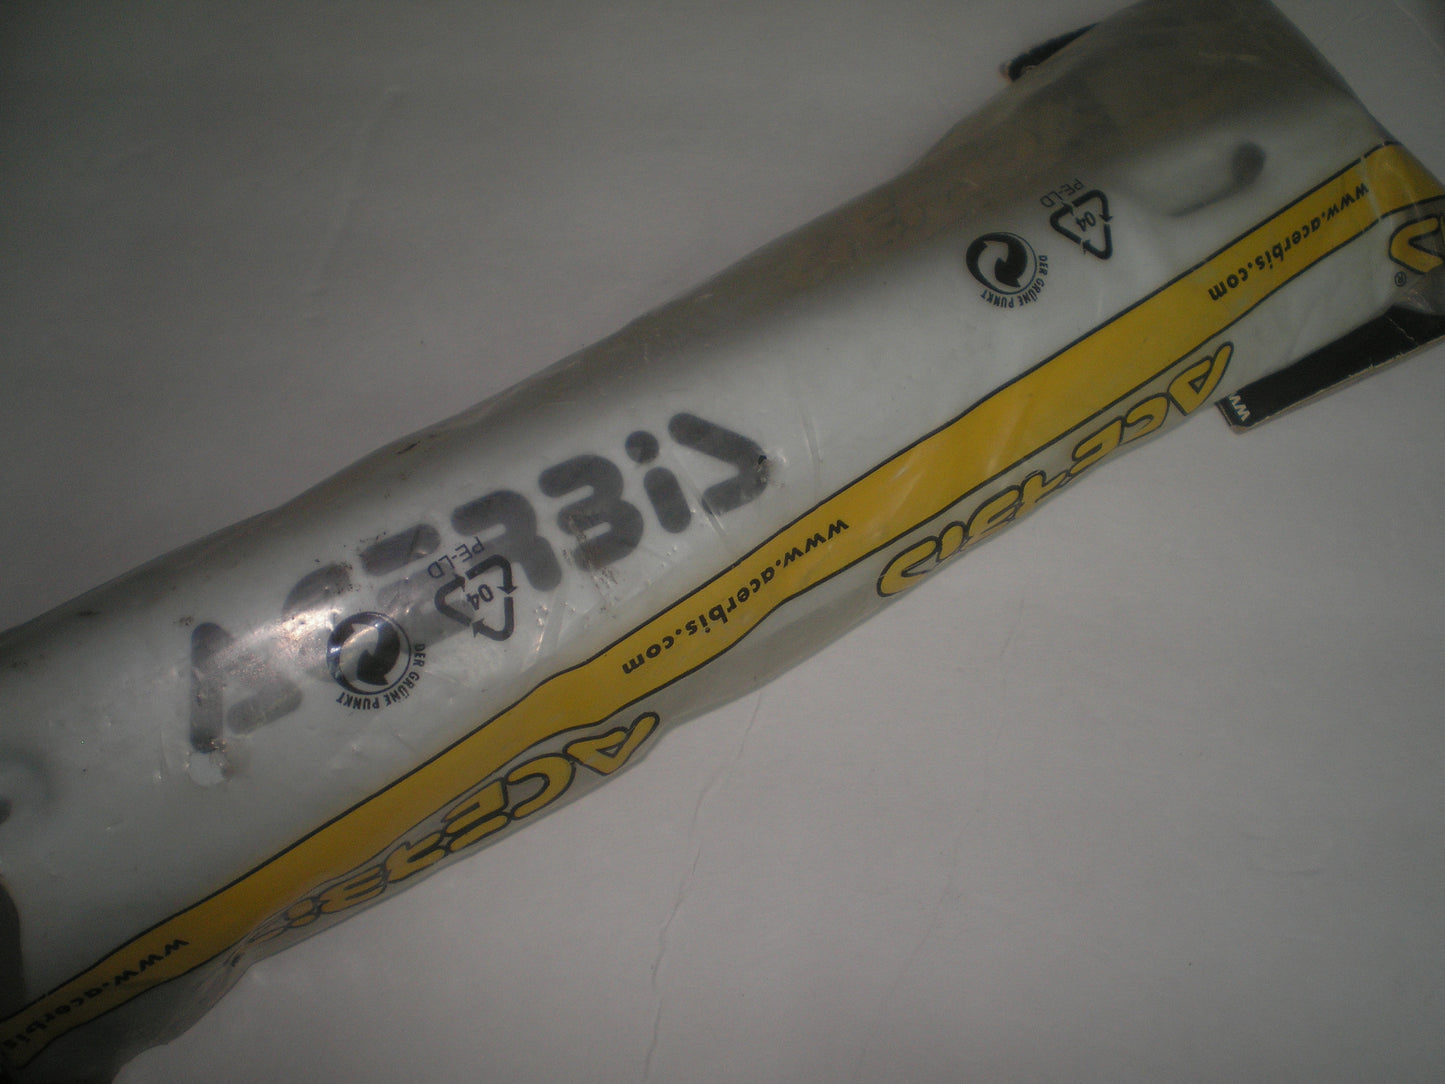 SUZUKI RM125 RM250  White Front Left Lower Fork Cover   Acerbis # 22-5230-06